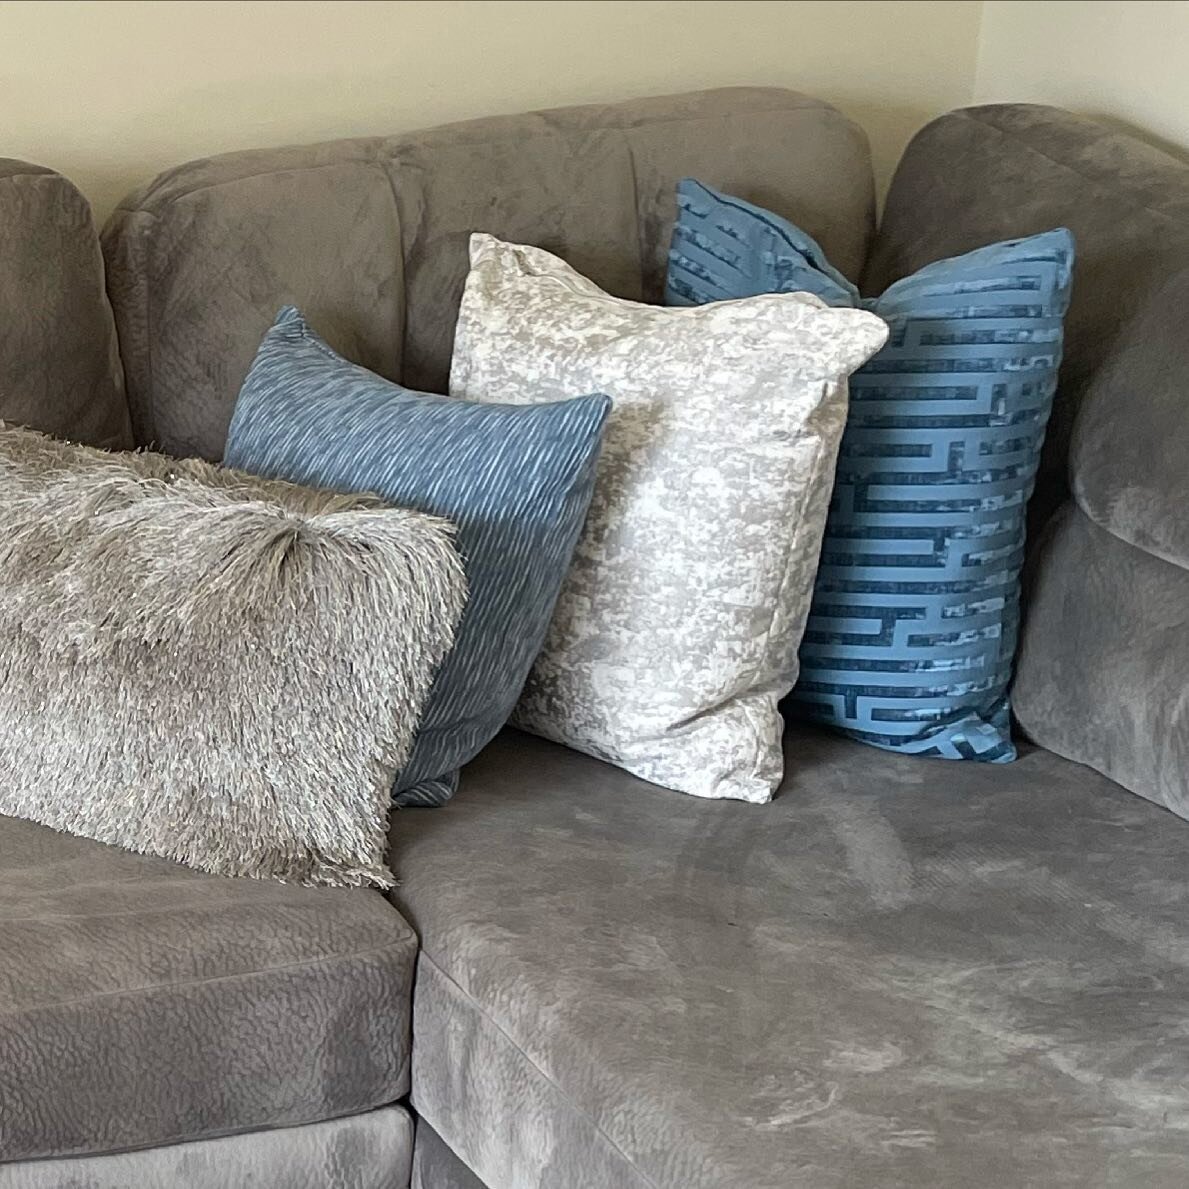 I love this blue &amp; grey combo. 
Our Dove 🕊&amp; Jewel 💎 pillow are available online 

Shop⤵️
www.elevateddecorcollection.com

#pillows #pillow #decorativepillows #pillowcase #pillowcovers #bluedecor #homedecor #livingroomdecor #greyfurniture #g